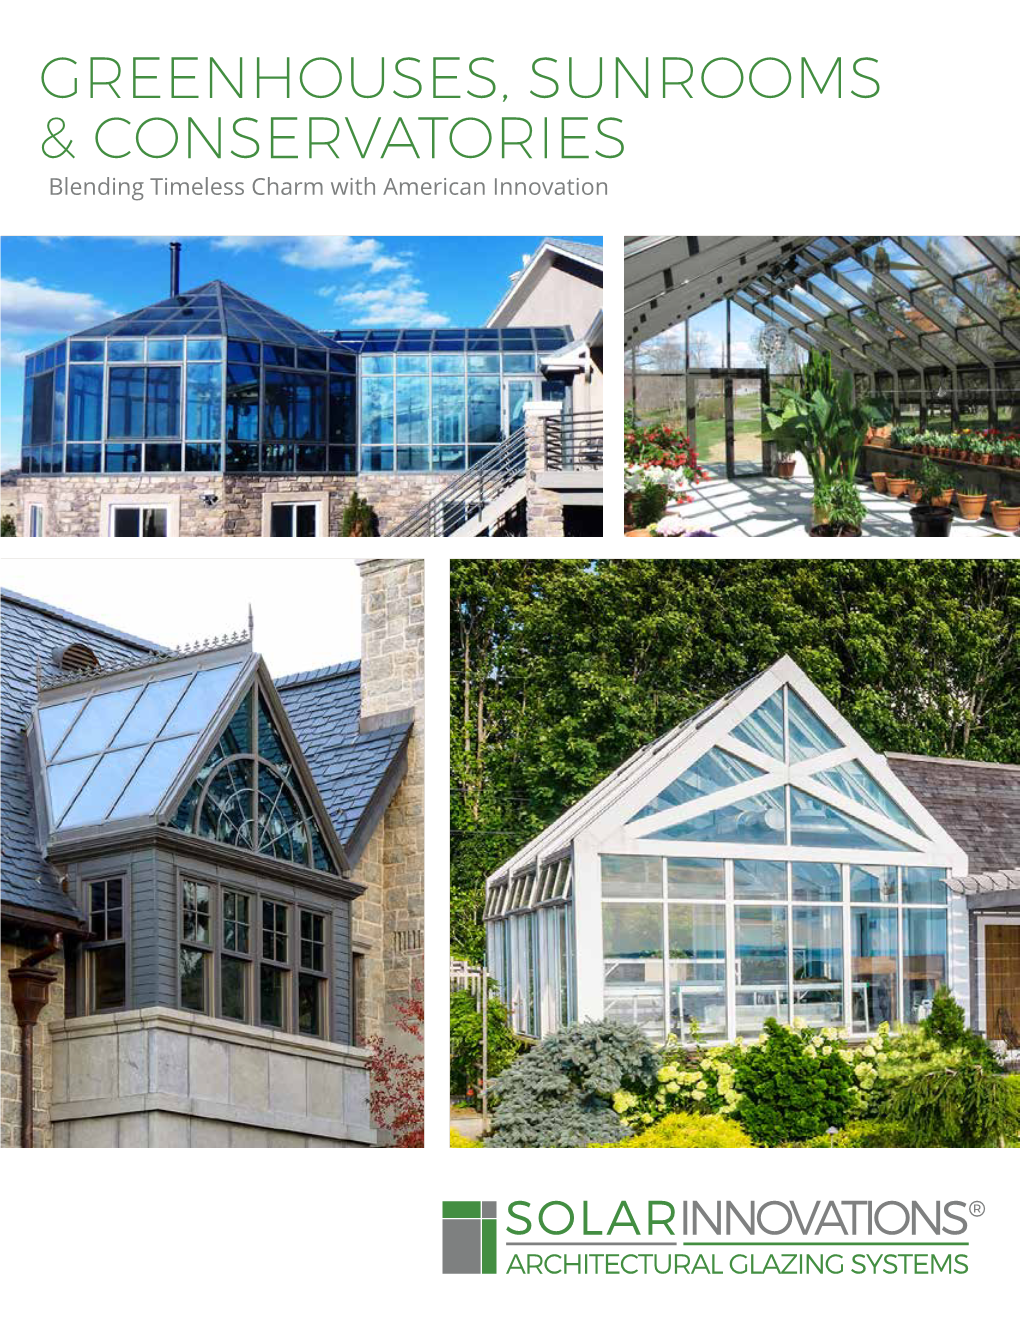 Greenhouses, Sunrooms & Conservatories